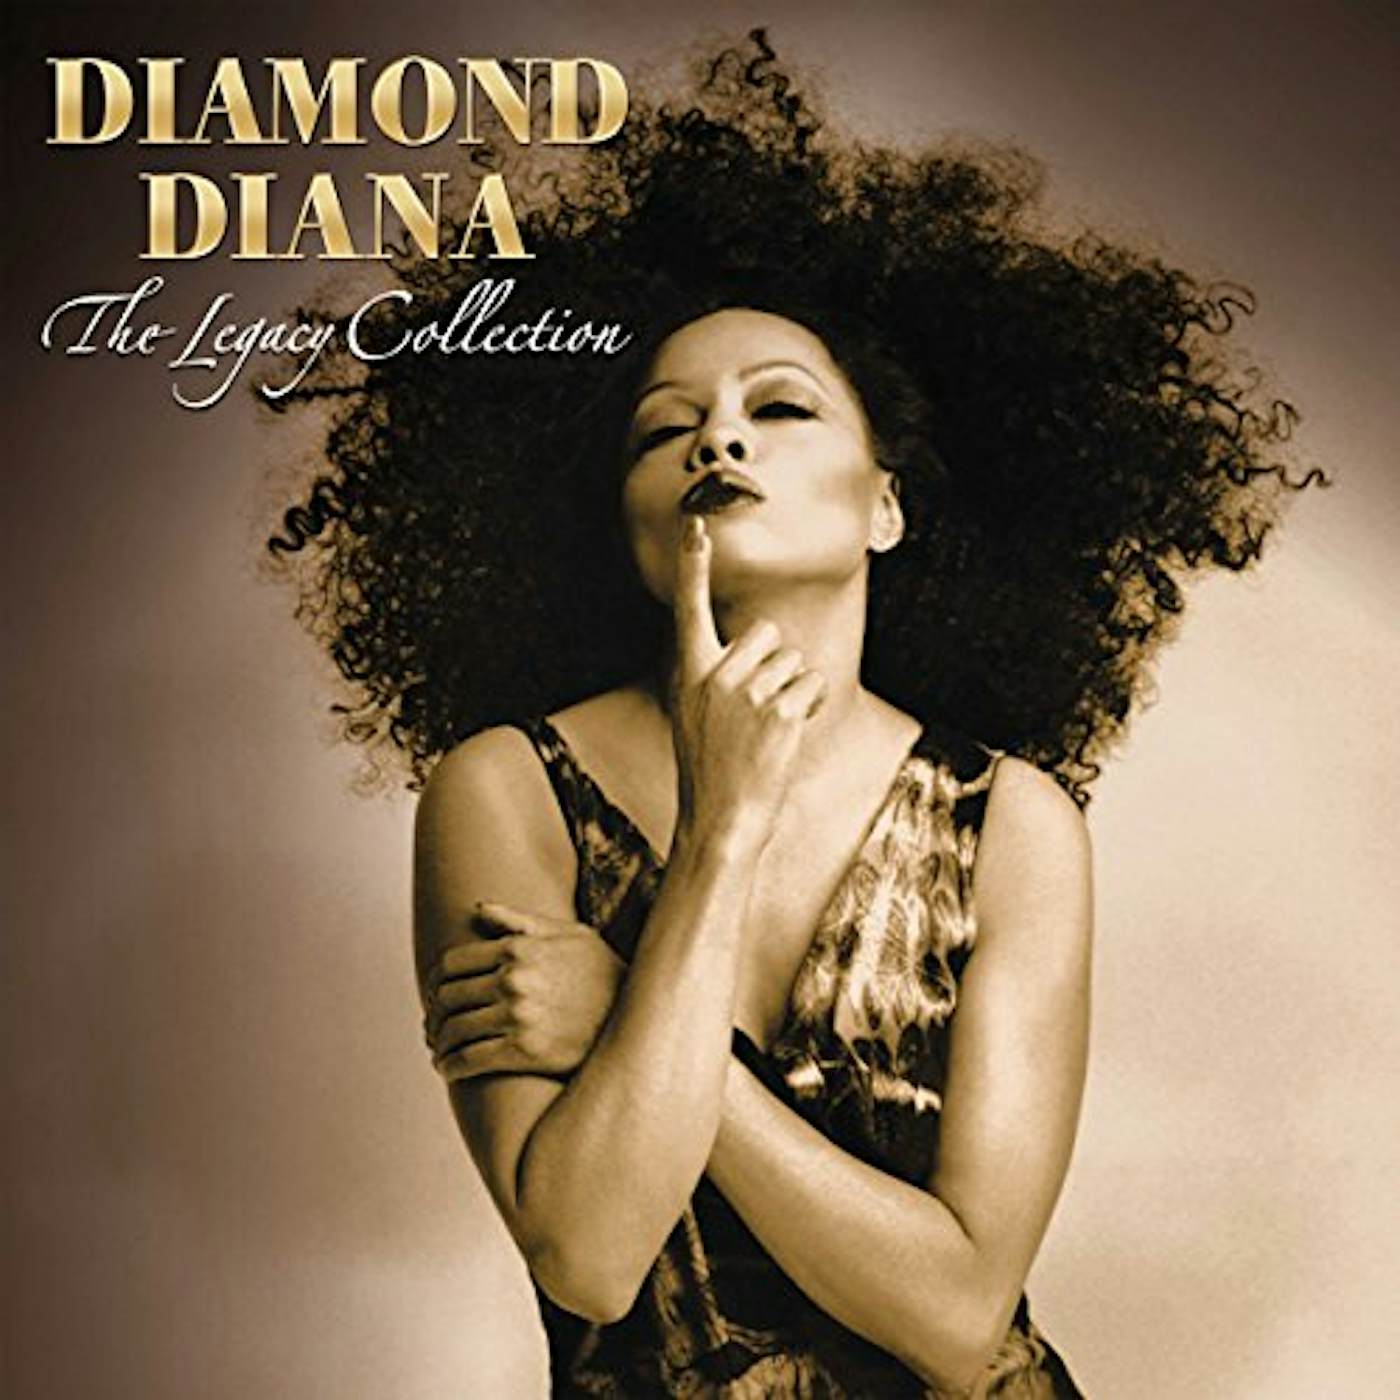 Diana Ross DIAMOND DIANA: THE LEGACY COLLECTION CD